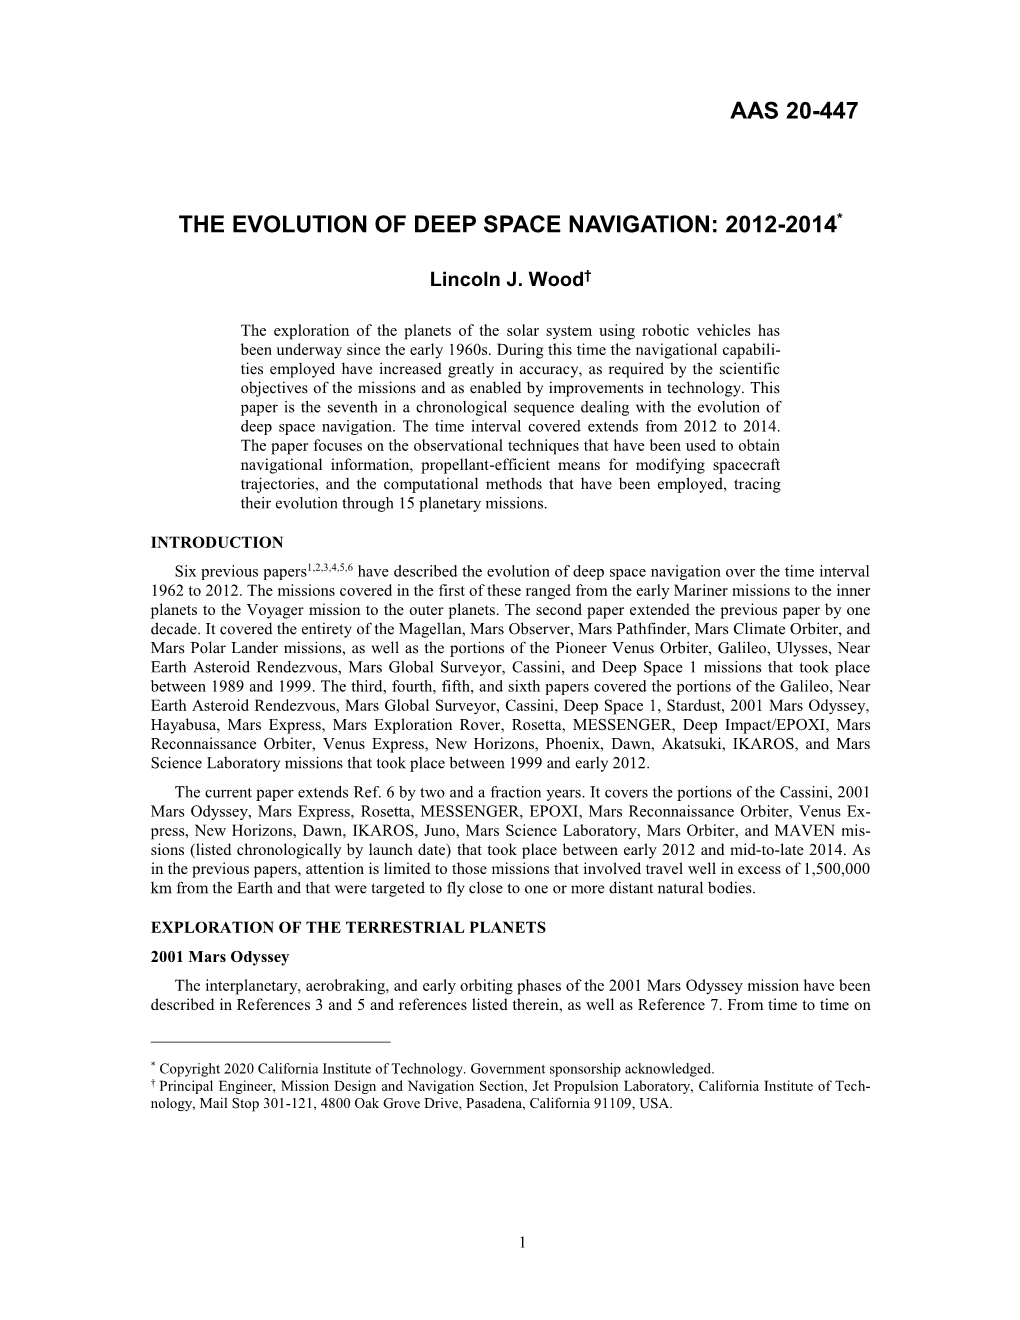 The Evolution of Deep Space Navigation: 2012-2014* Aas 20-447